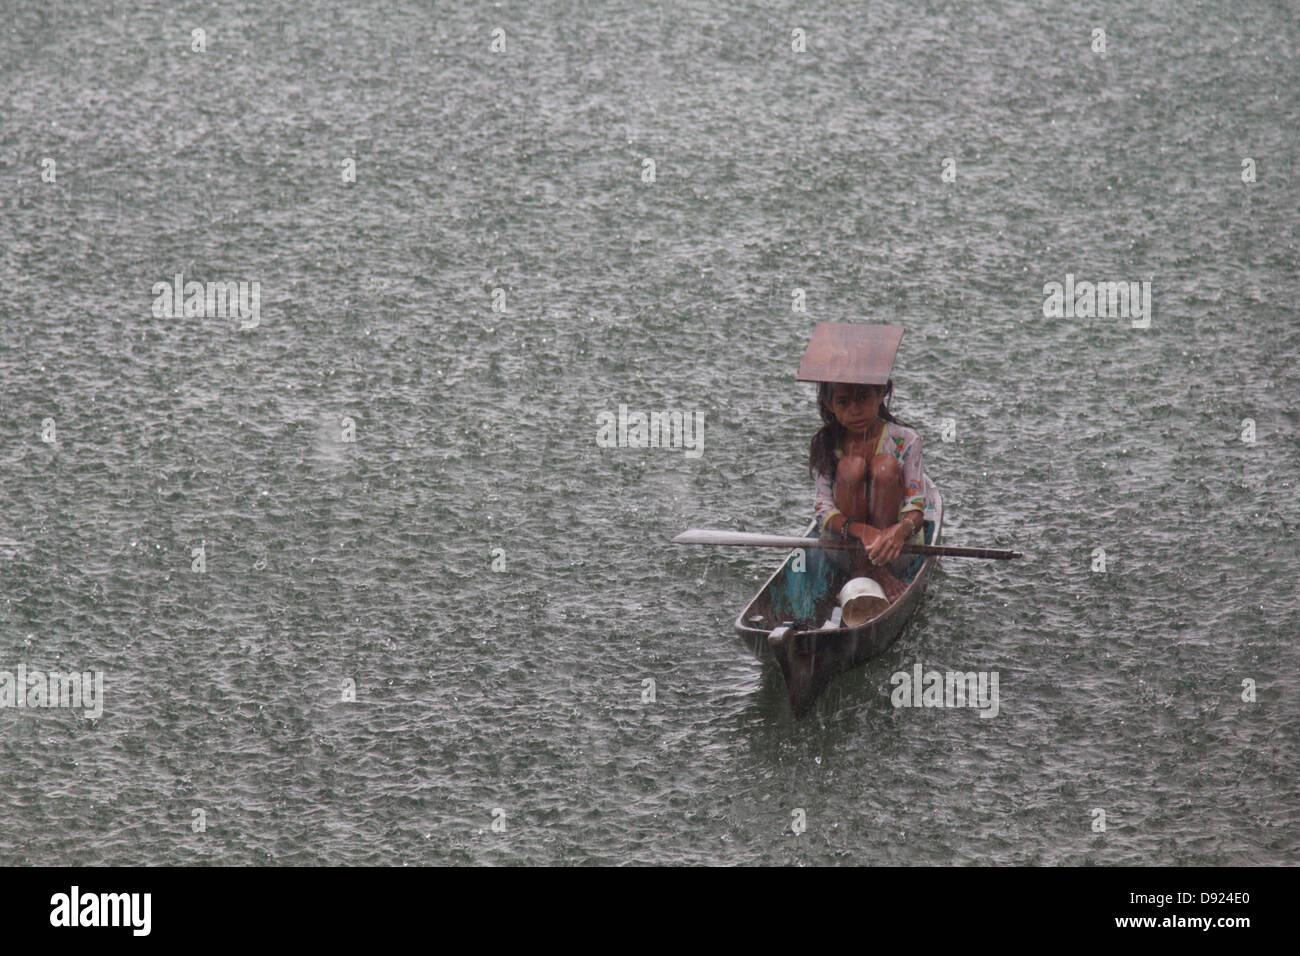 young girl in a canoe Stock Photo